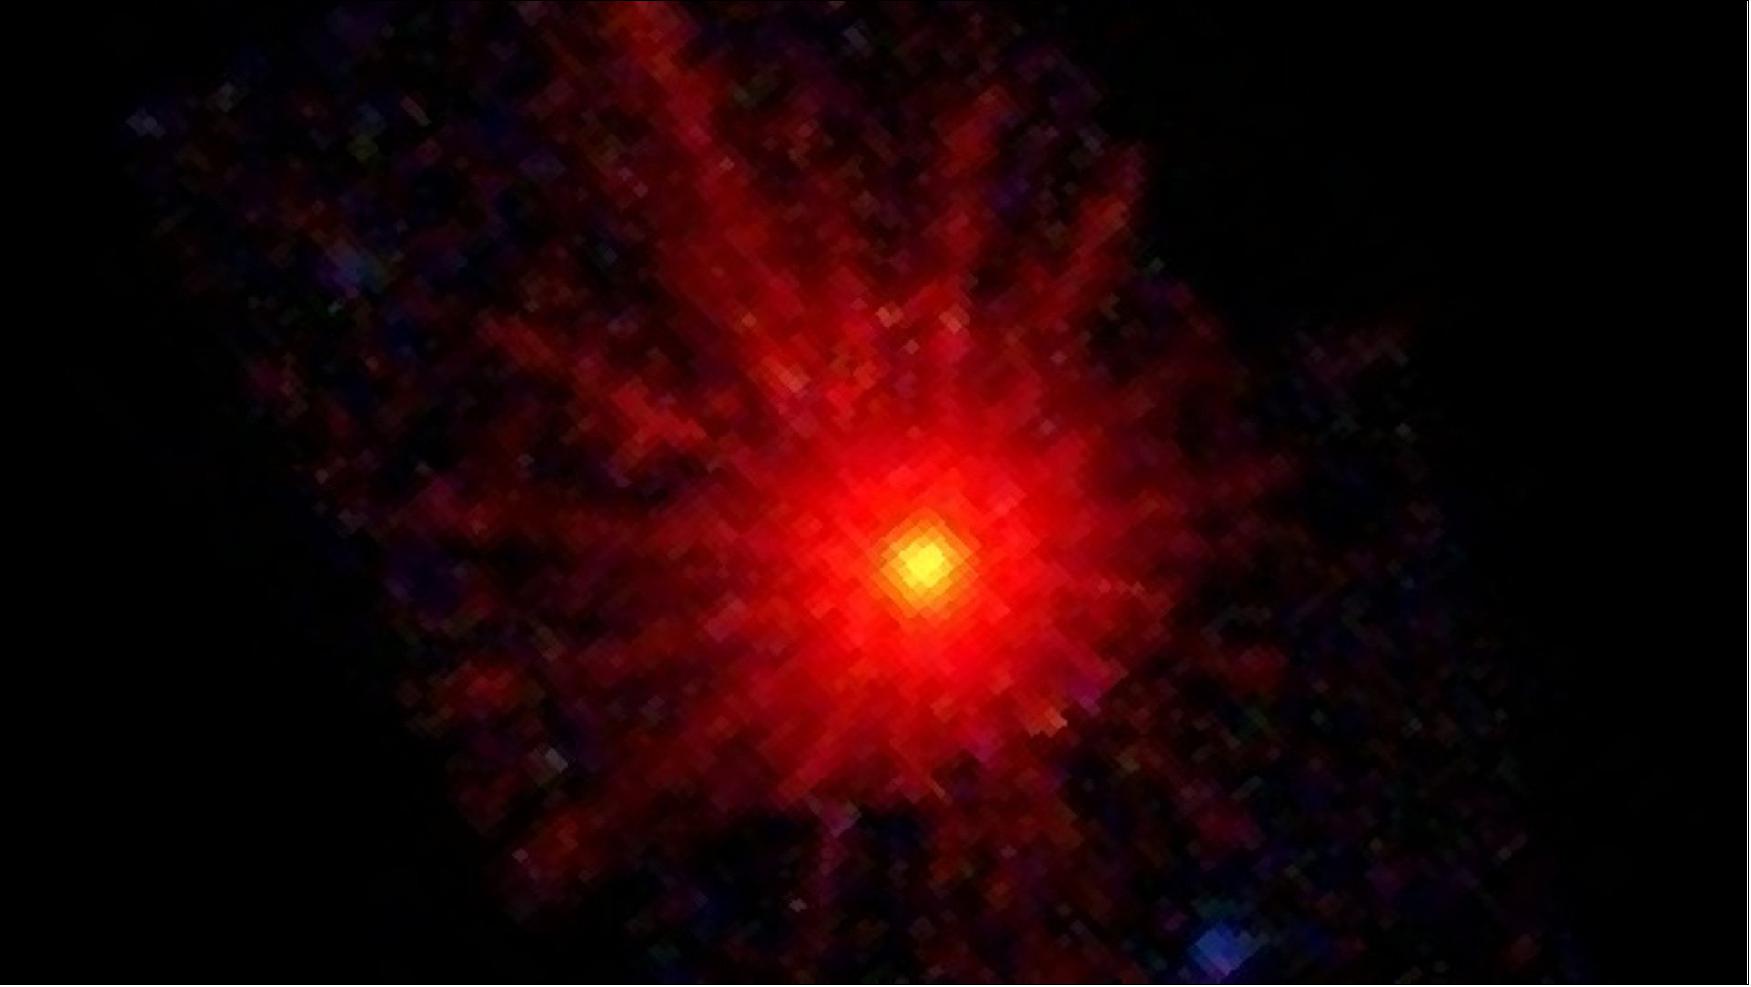 Figure 65: The cosmic source called ASASSN-14li, concealing a black hole at least one million times as massive as the Sun that shredded and devoured a nearby star, as viewed by the European Photon Imaging Camera (EPIC) on ESA's XMM-Newton X-ray observatory. Observations of ASASSN-14li have revealed an exceptionally bright and stable signal that oscillated over a period of 131 seconds for a long time: 450 days. By combining this with information about the black hole’s mass and size, the astronomers found that the hole must be spinning rapidly – at more than 50% of the speed of light – and that the signal came from its innermost regions (image credit: ESA/XMM-Newton)